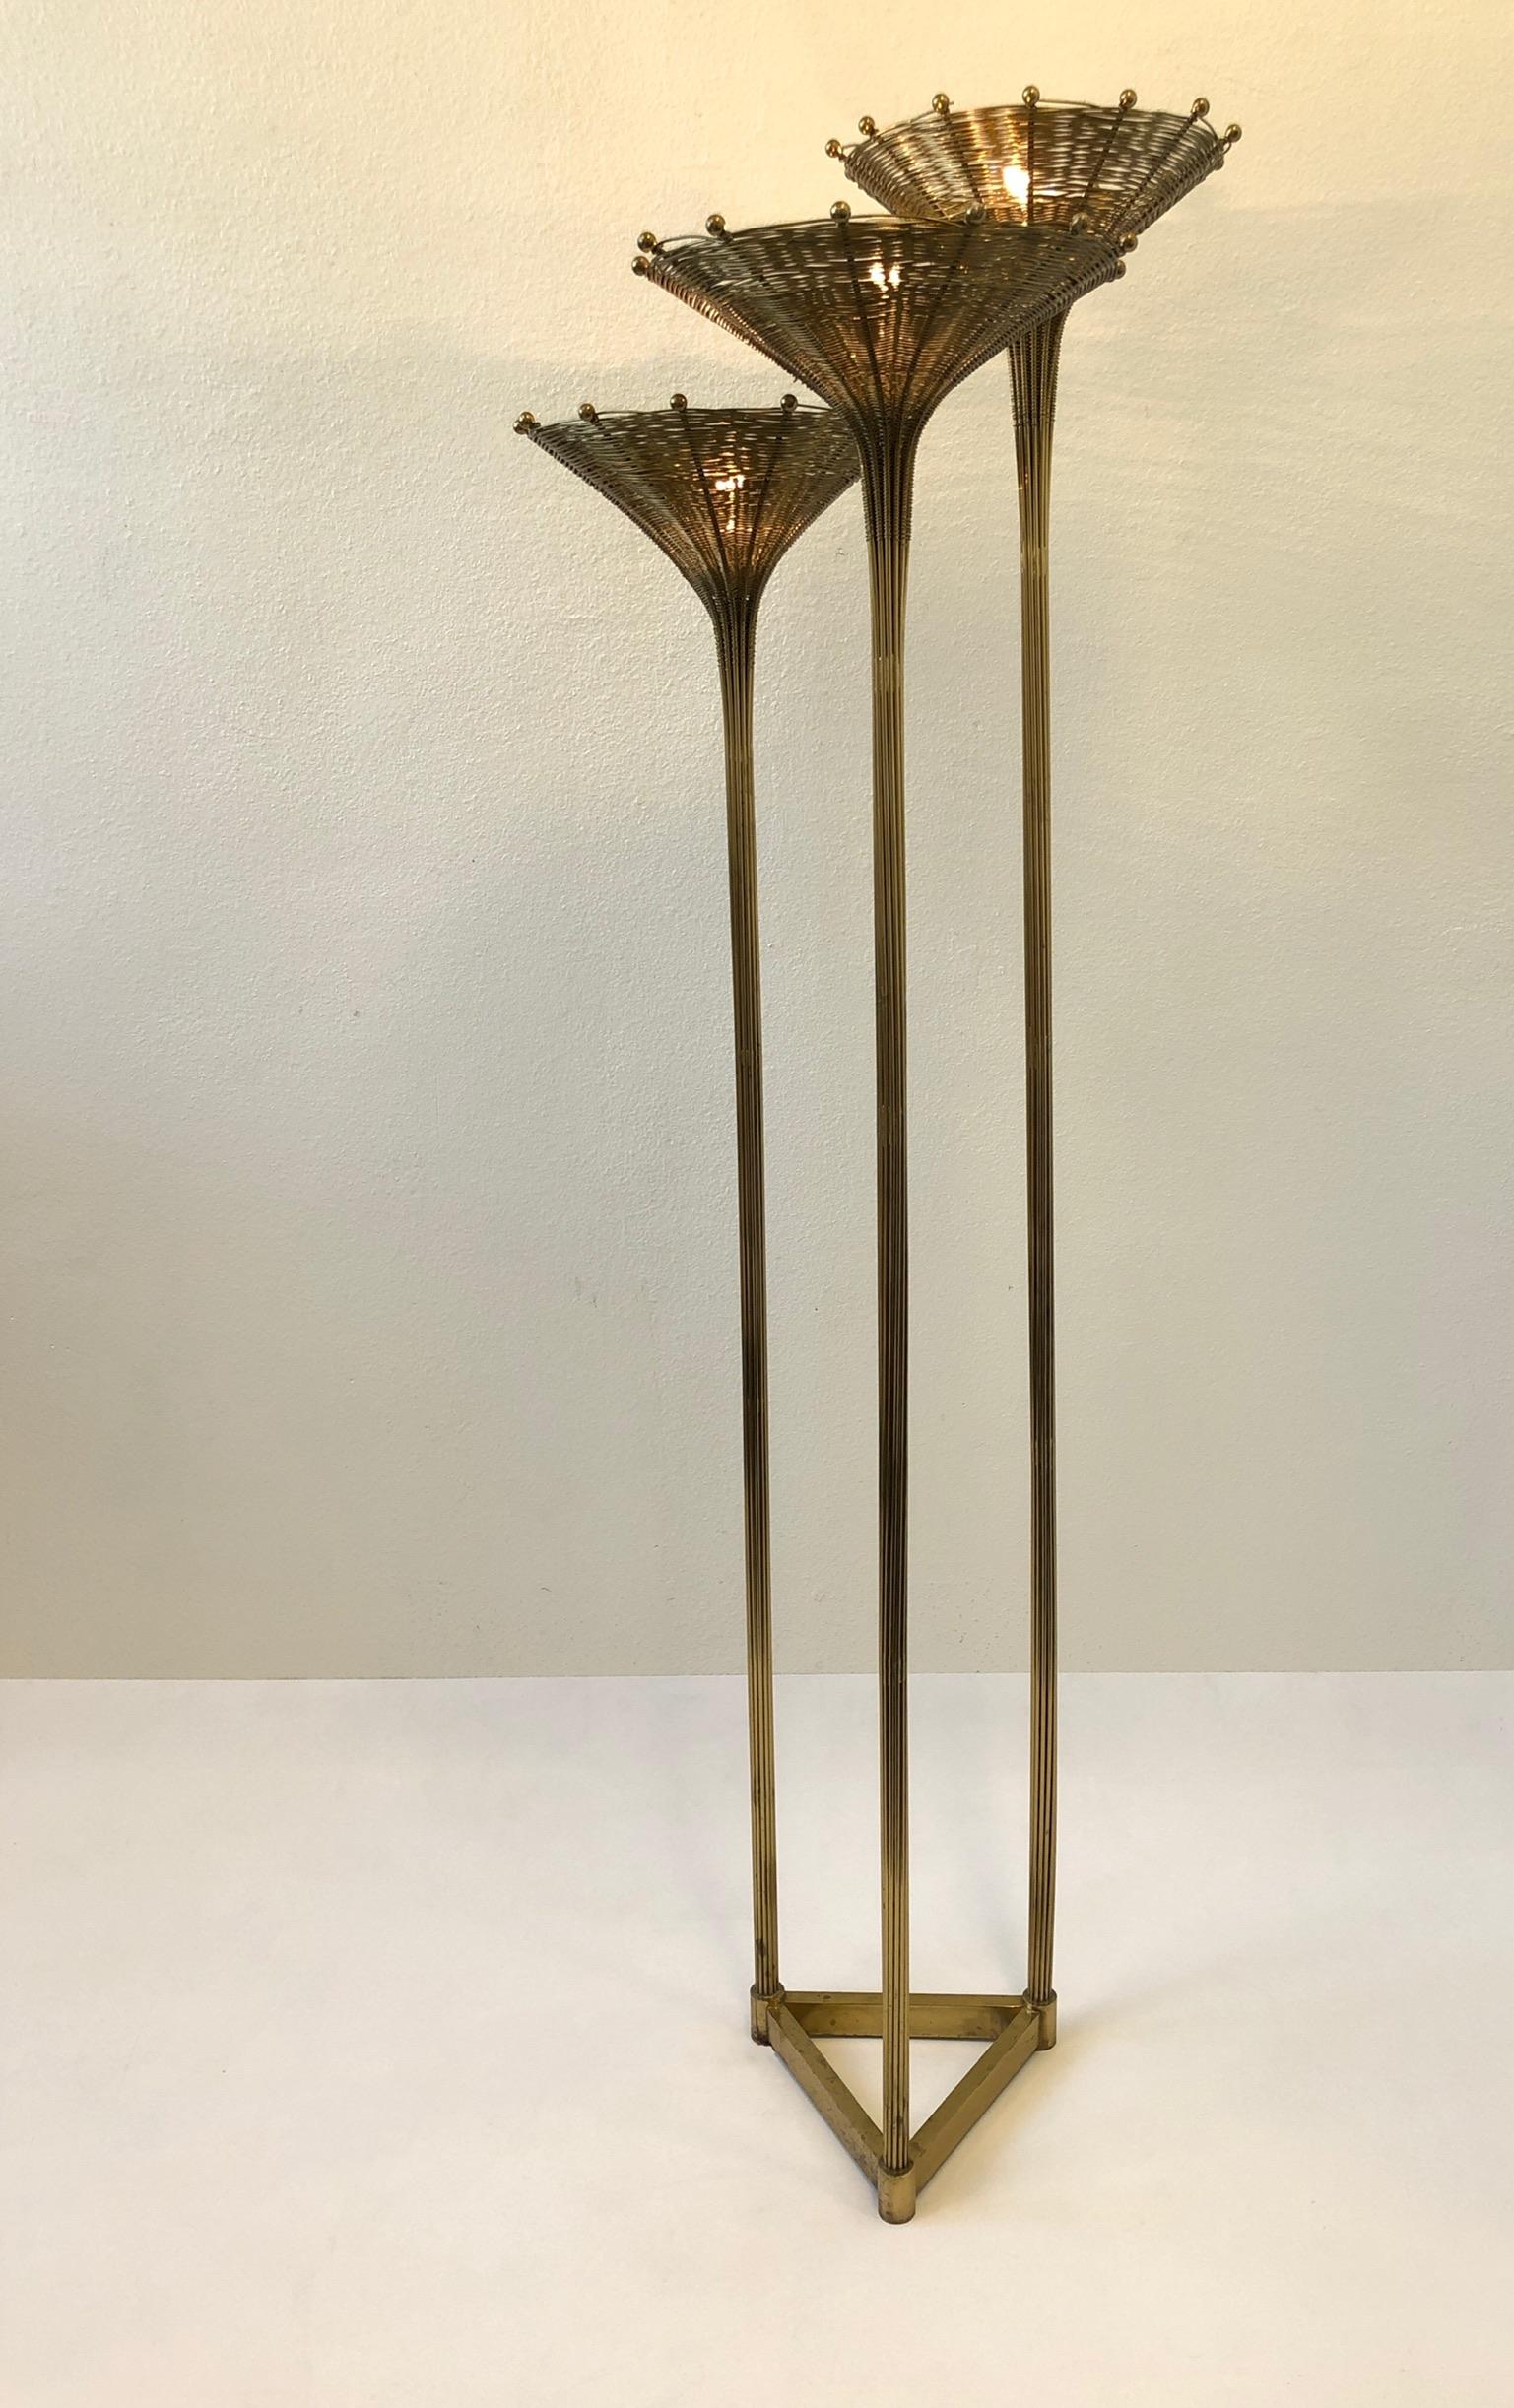 Italian aged brass “Papyrus” floor lamp design by Nucci Valsecchi in the 1970s.
The lamp is solid brass with some age to it (see detail photos). It can be polished if desired. Newly rewired.
Dimensions: 74” high 25” deep 26” wide.